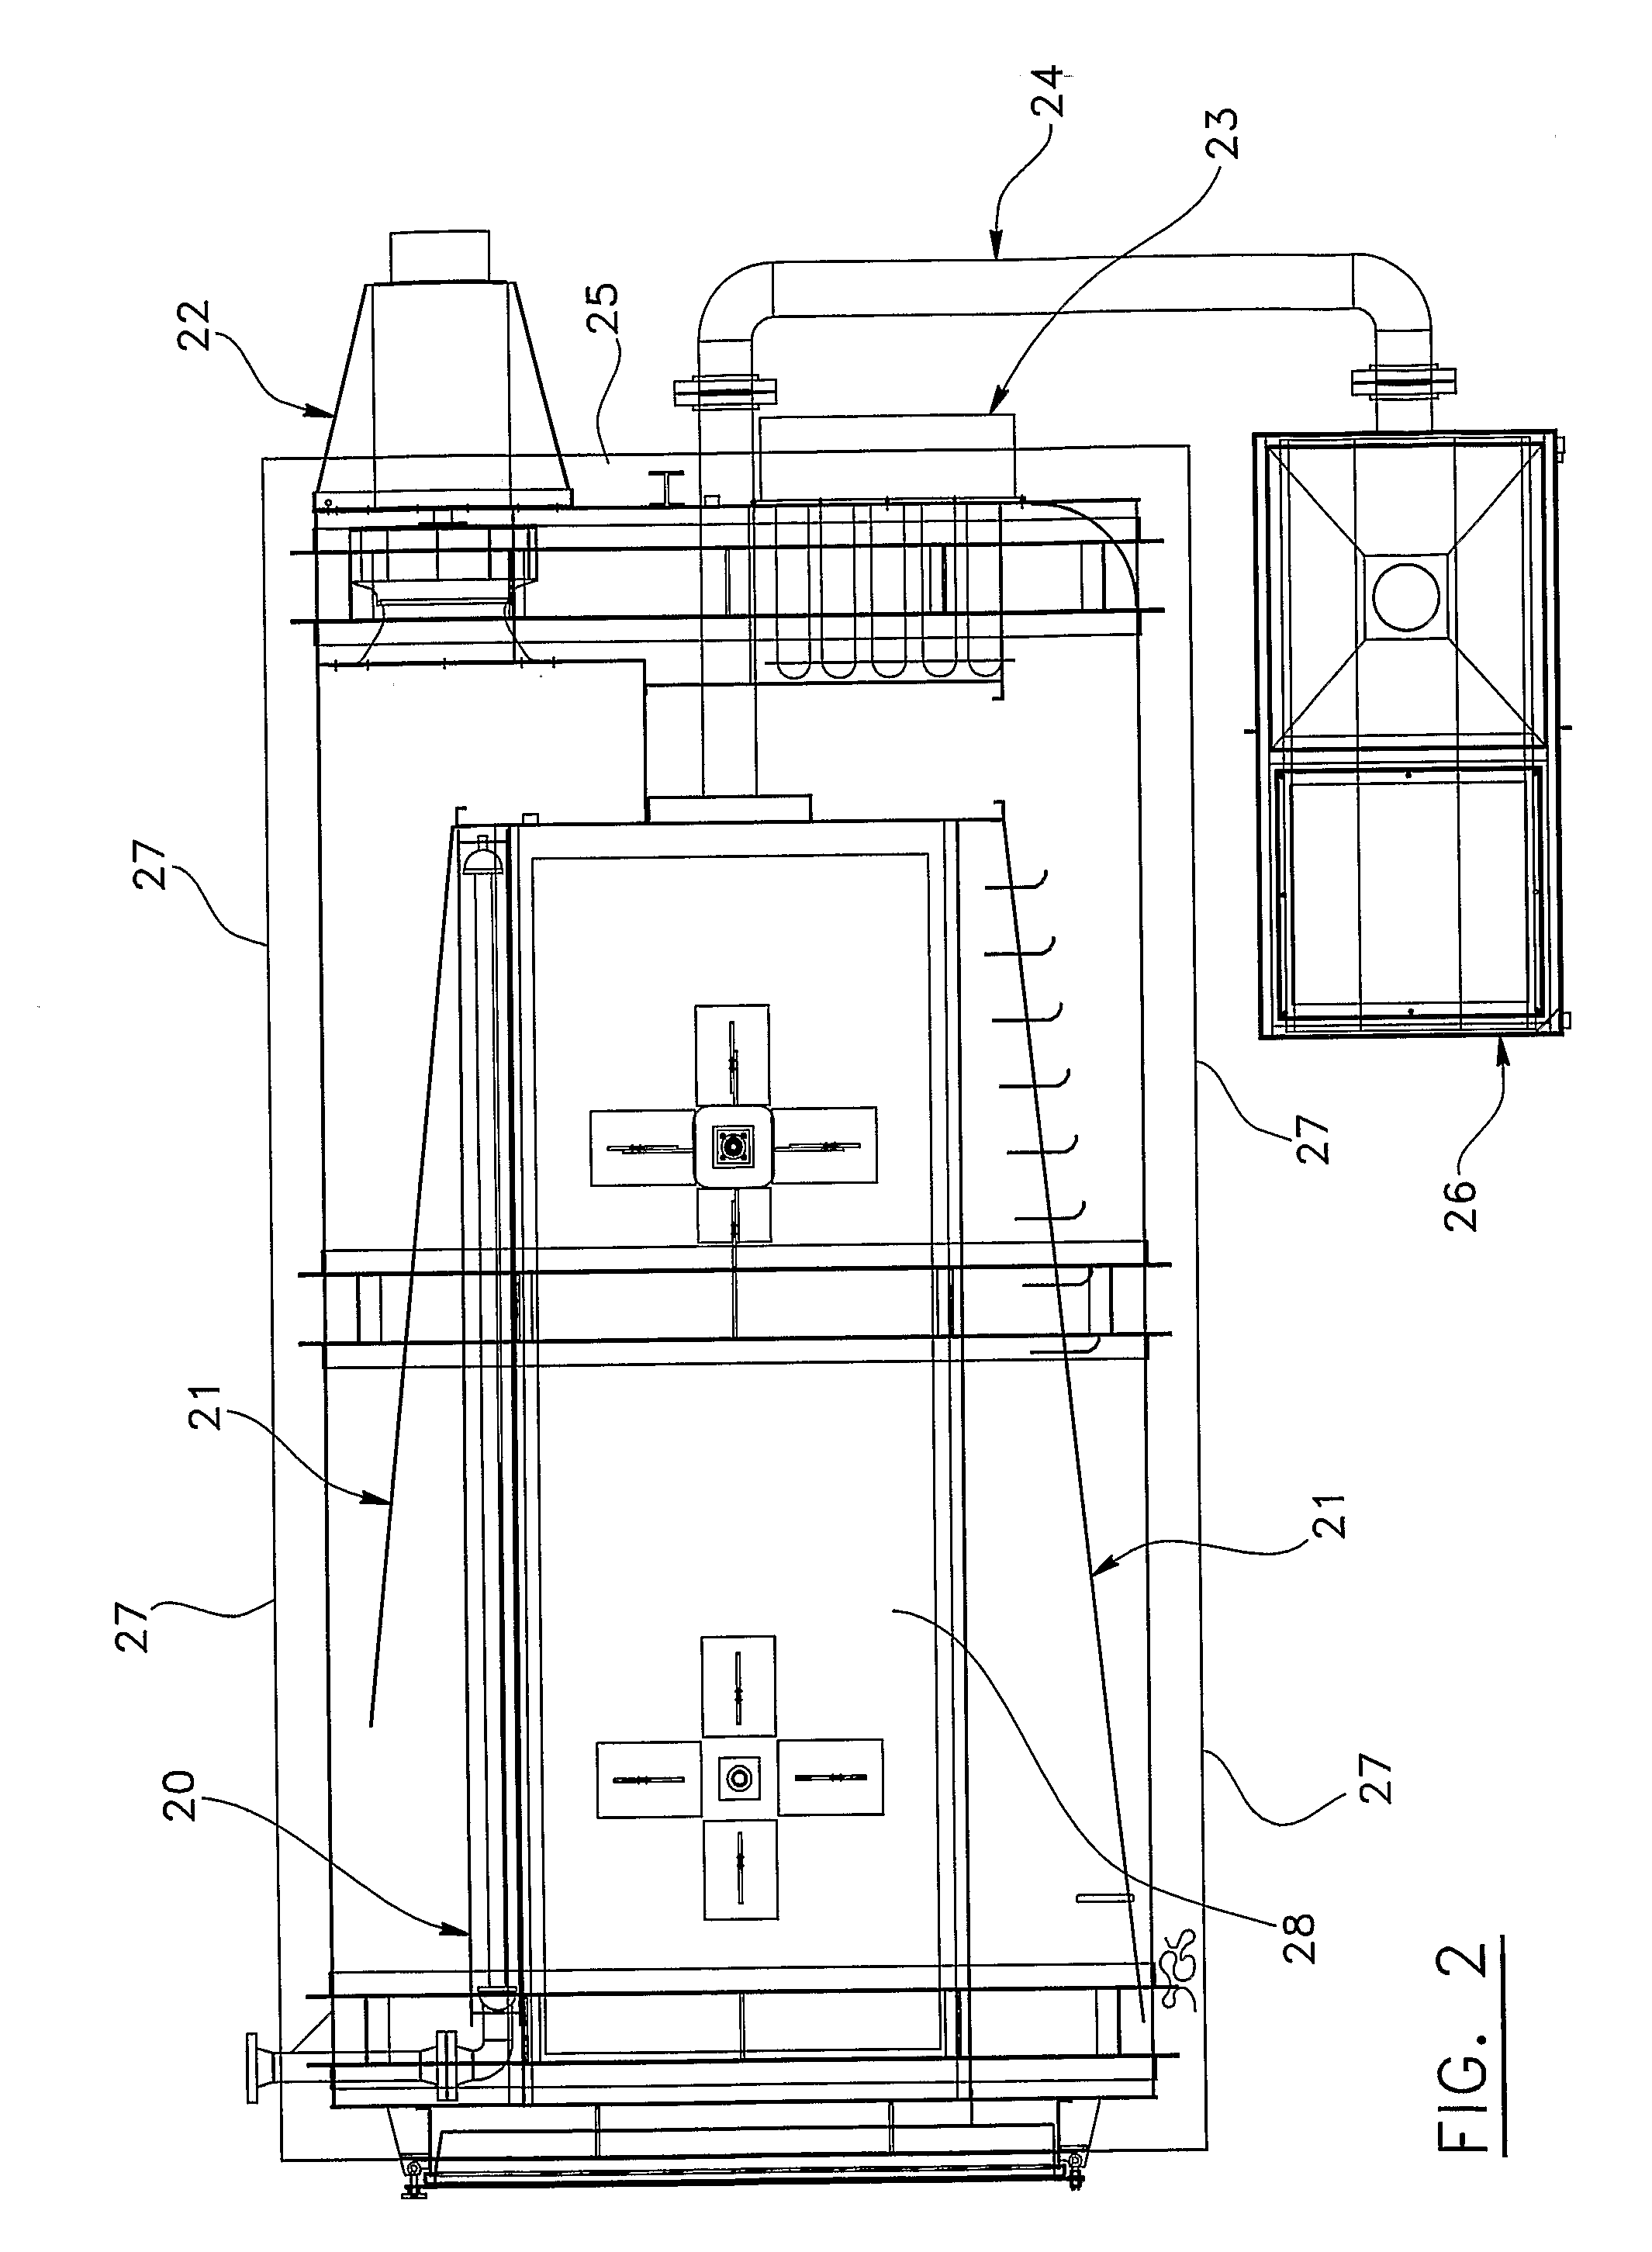 Process for Treating Lignocellulosic Material, and Apparatus for Carrying Out the Same